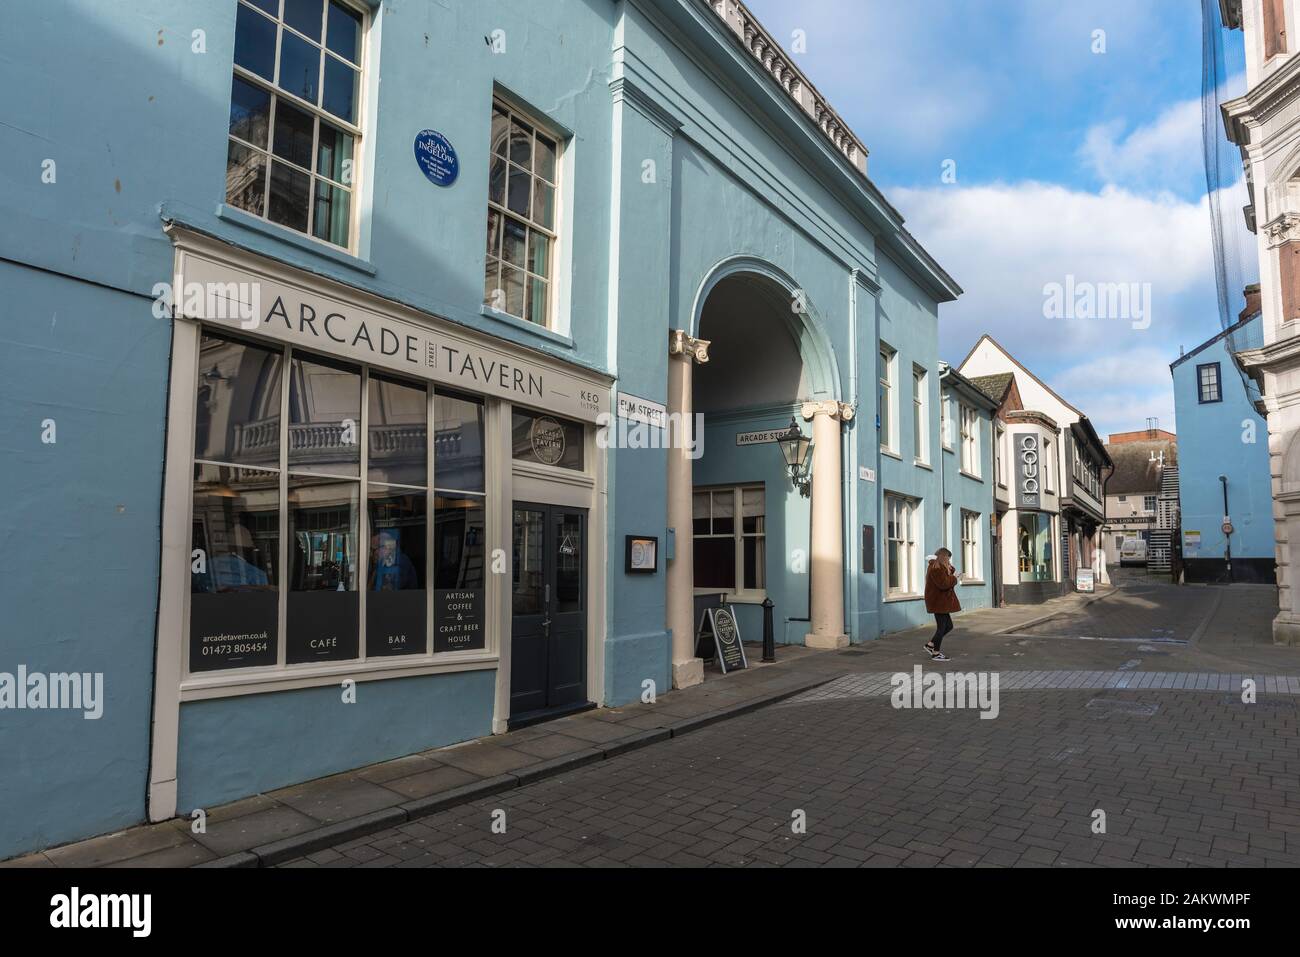 Arcade Ipswich, view of the Arcade tavern and entrance to the arcade in Lion Street in the centre of Ipswich Suffolk, UK. Stock Photo